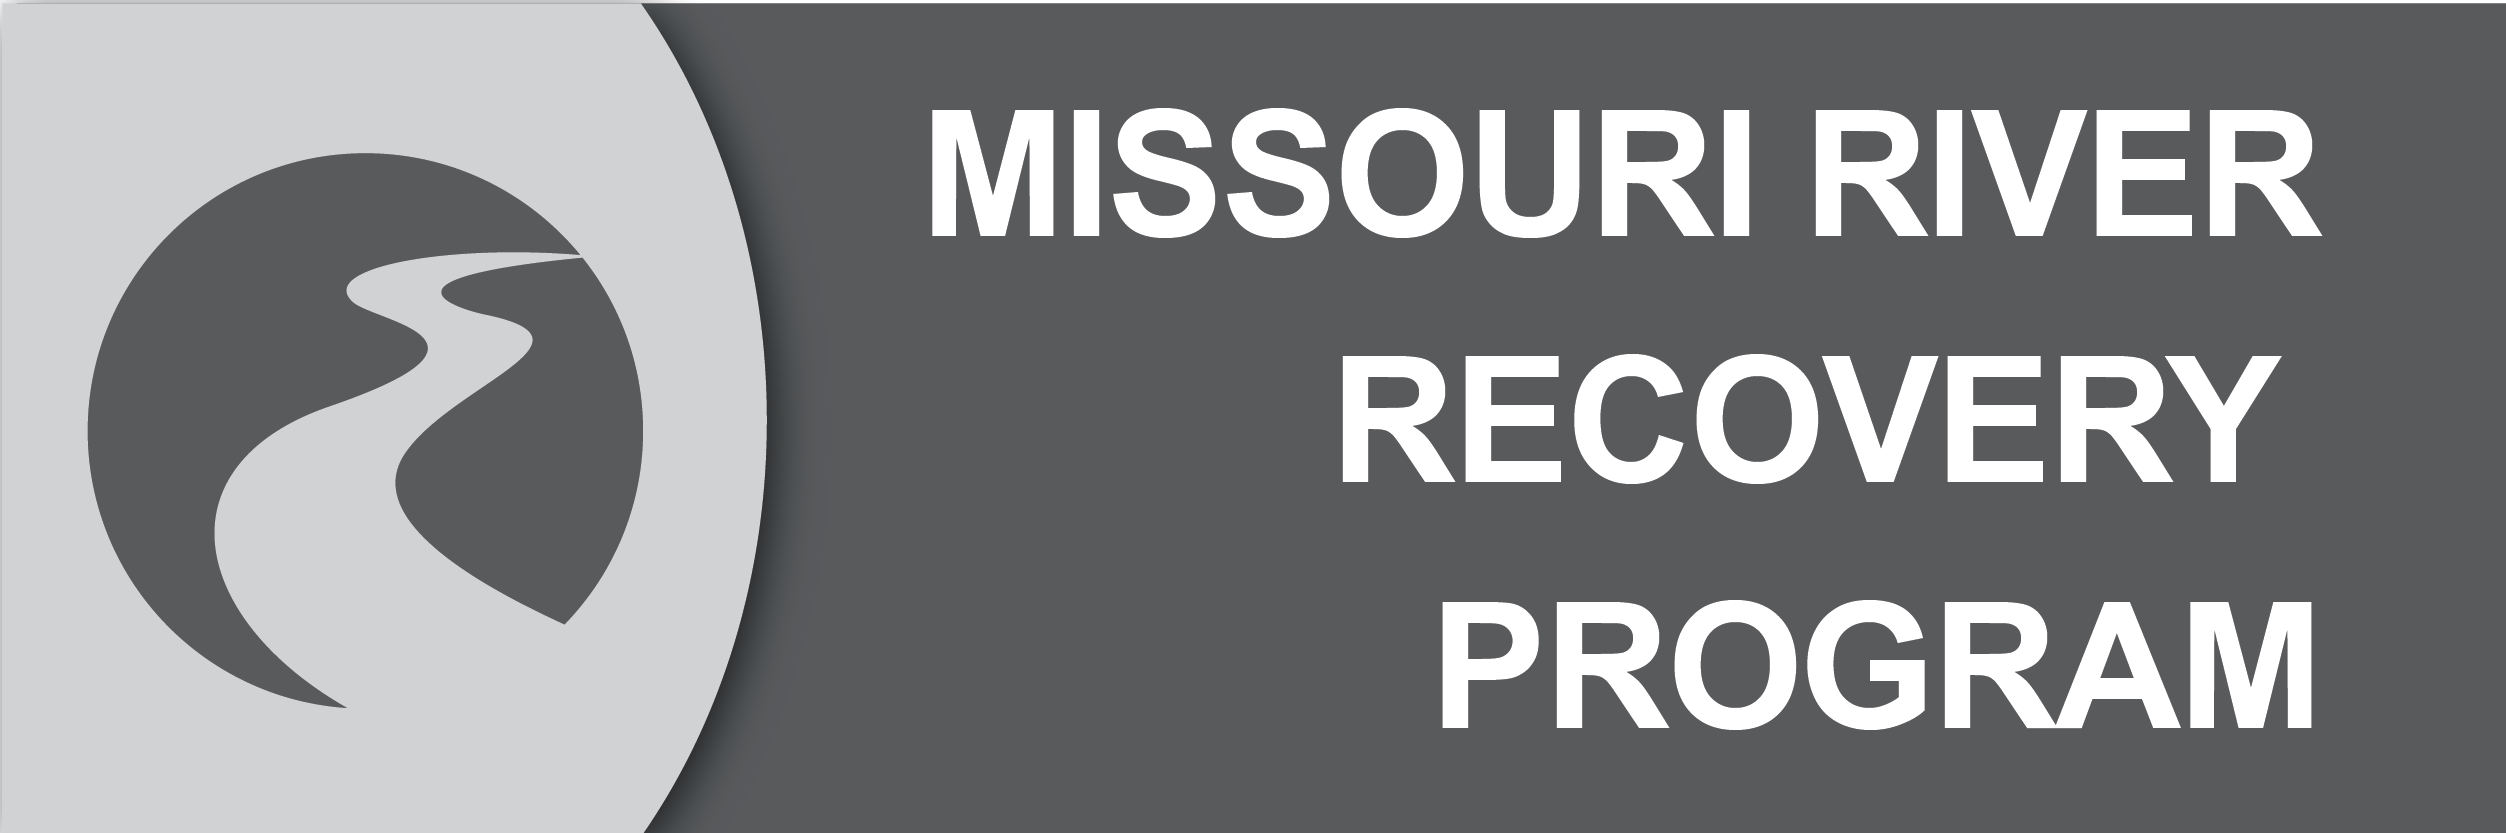 Icon with words "Missouri River Recovery Program"